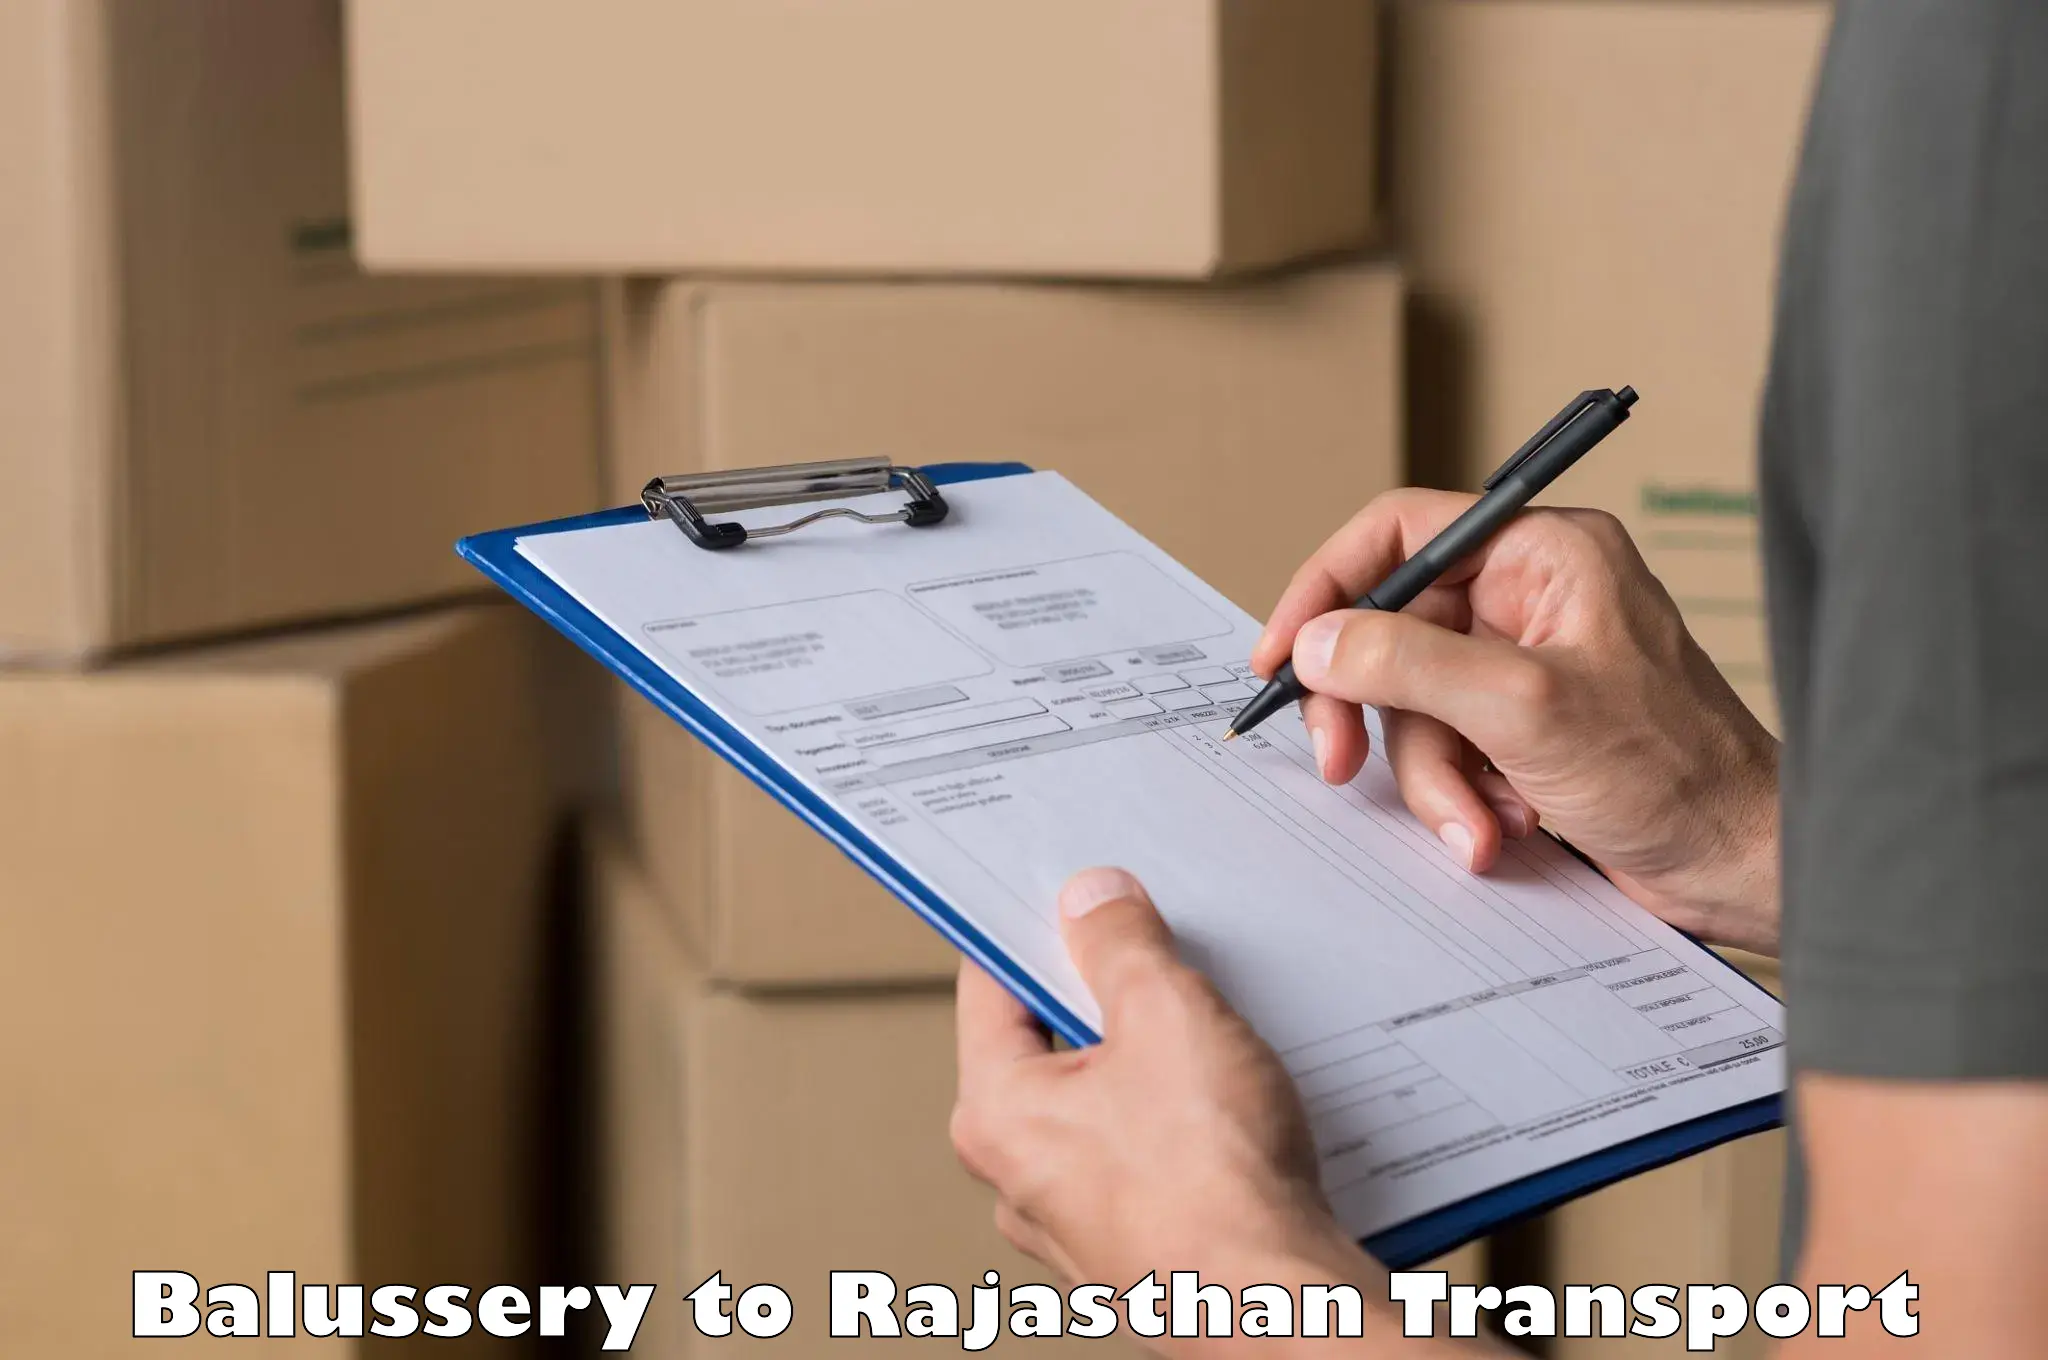 Truck transport companies in India Balussery to Morkheri